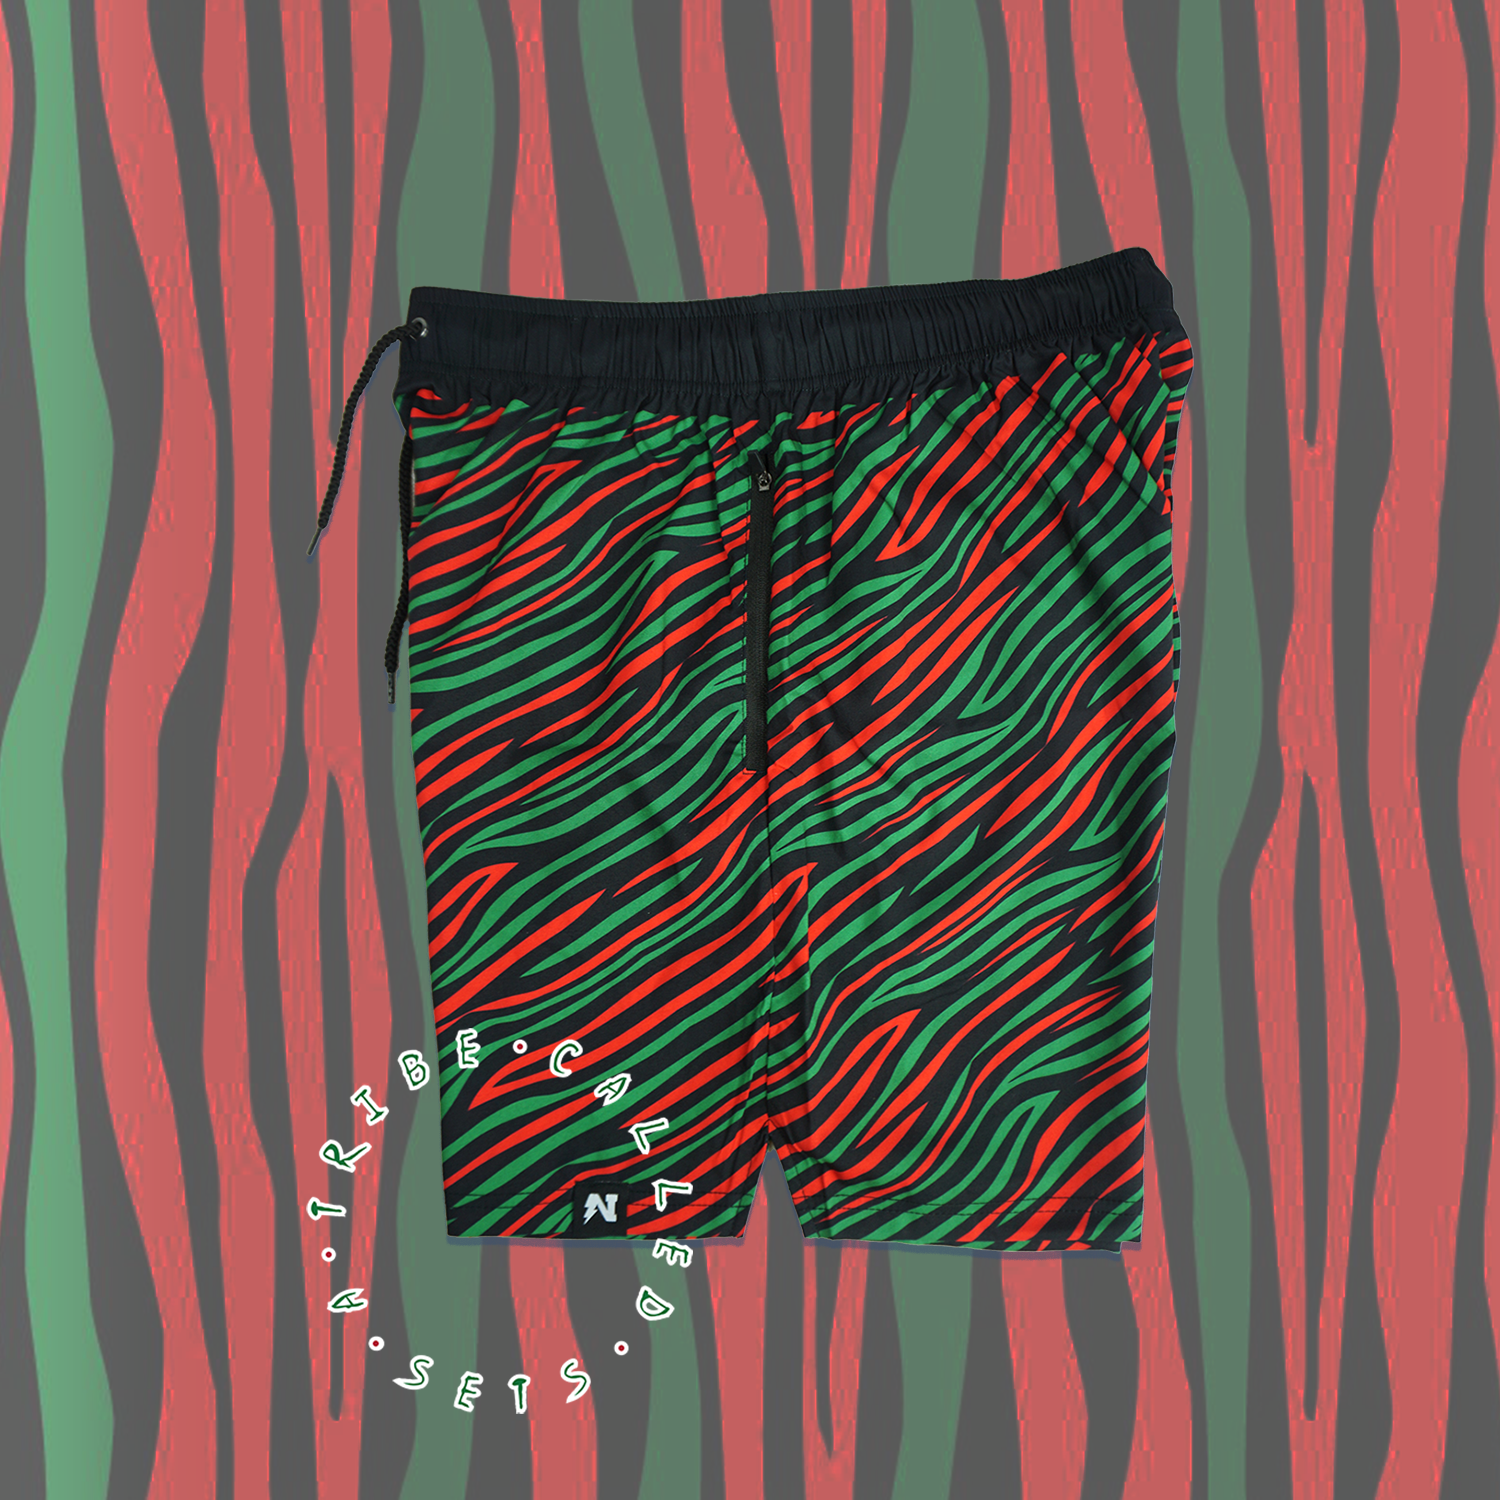 A Tribe Called Sets - Hybrid shorts